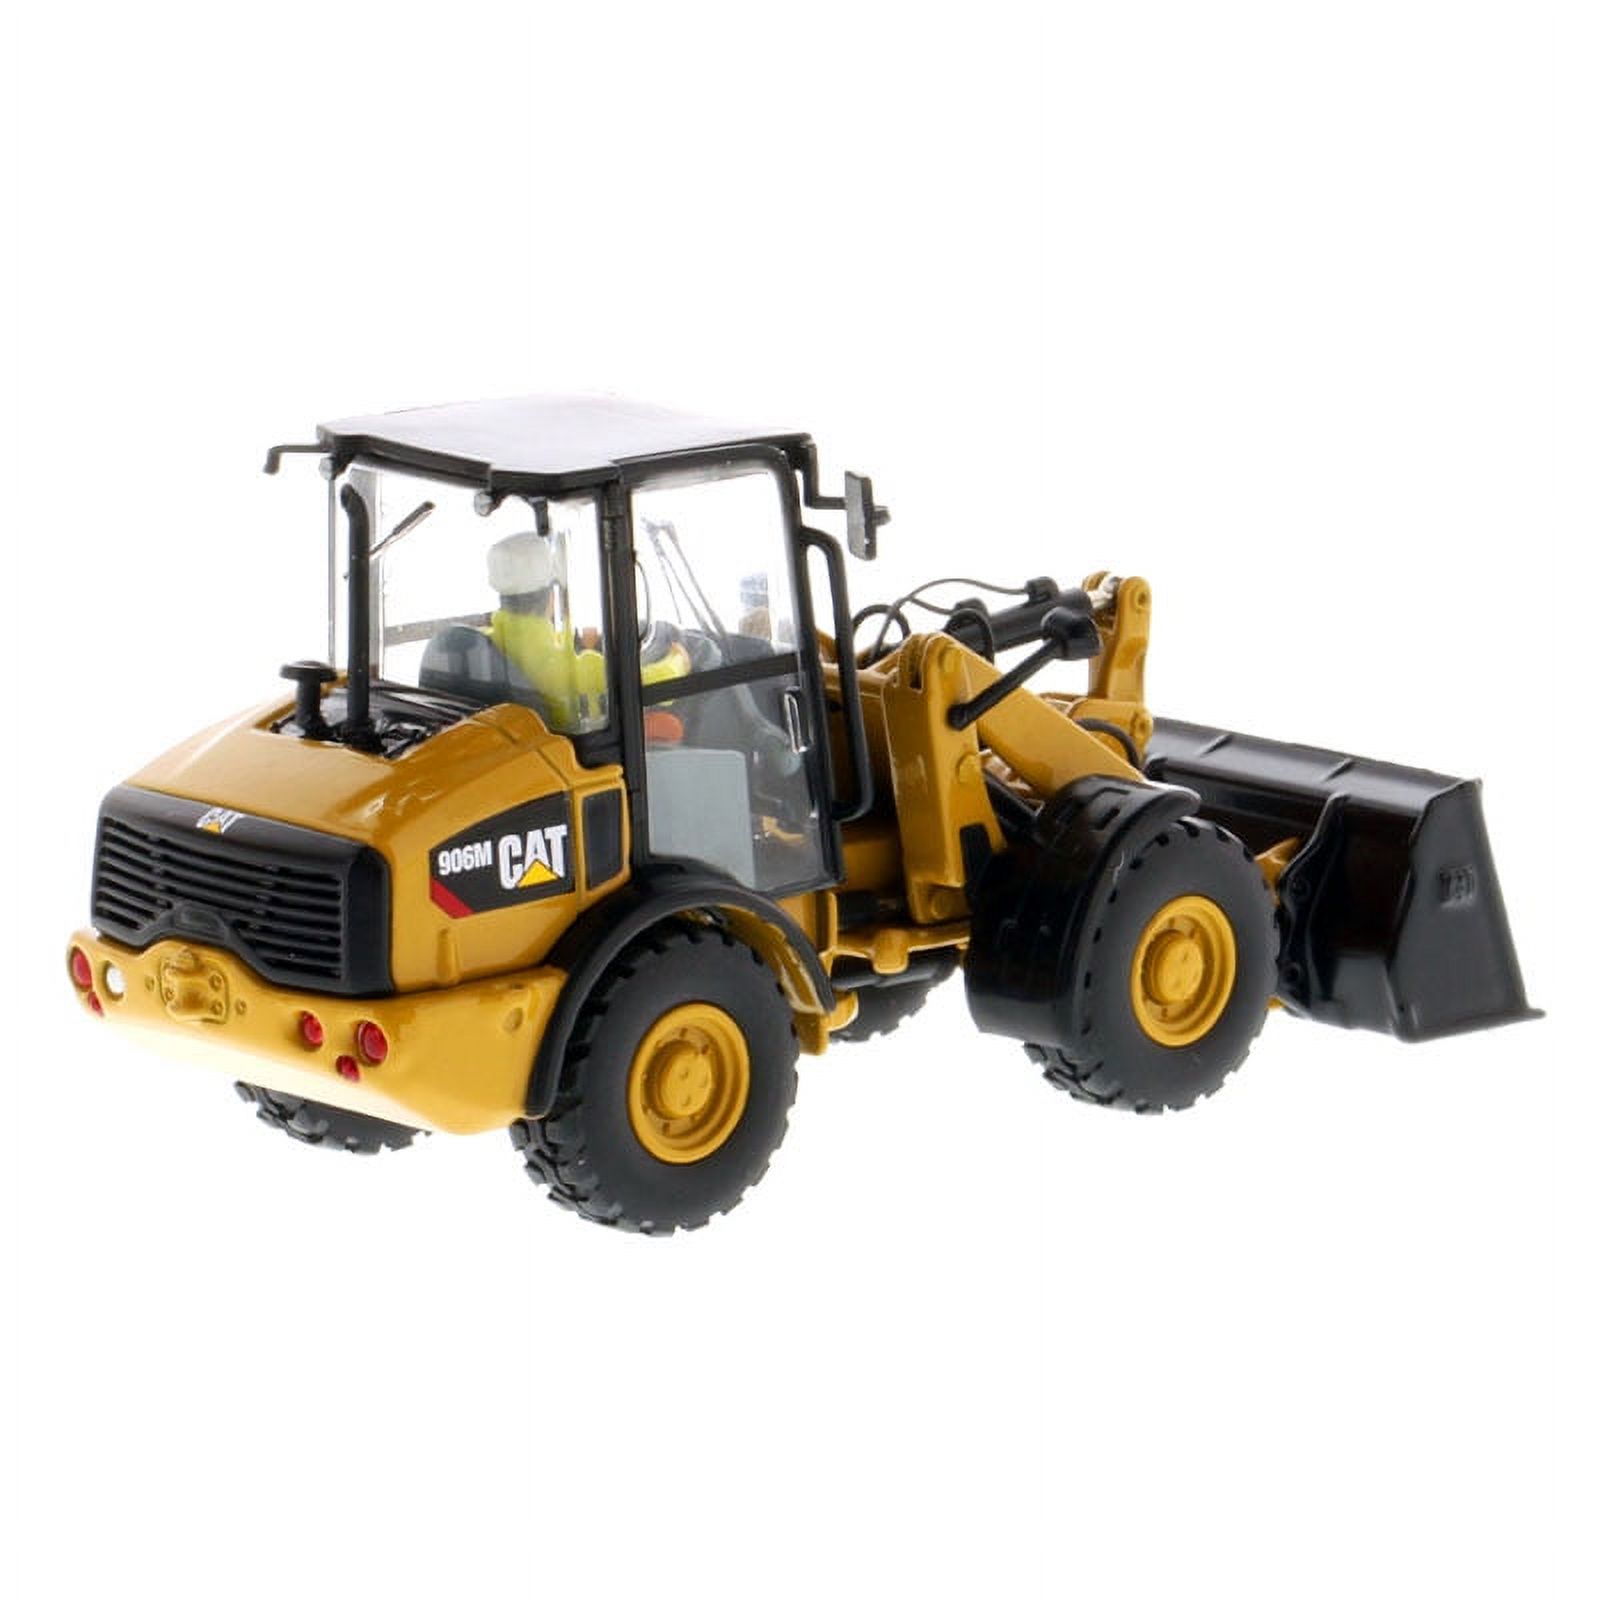 Diecast Masters 85557 1-50 CAT Caterpillar 906M Diecast Model Compact Wheel Loader with Operator - image 4 of 4